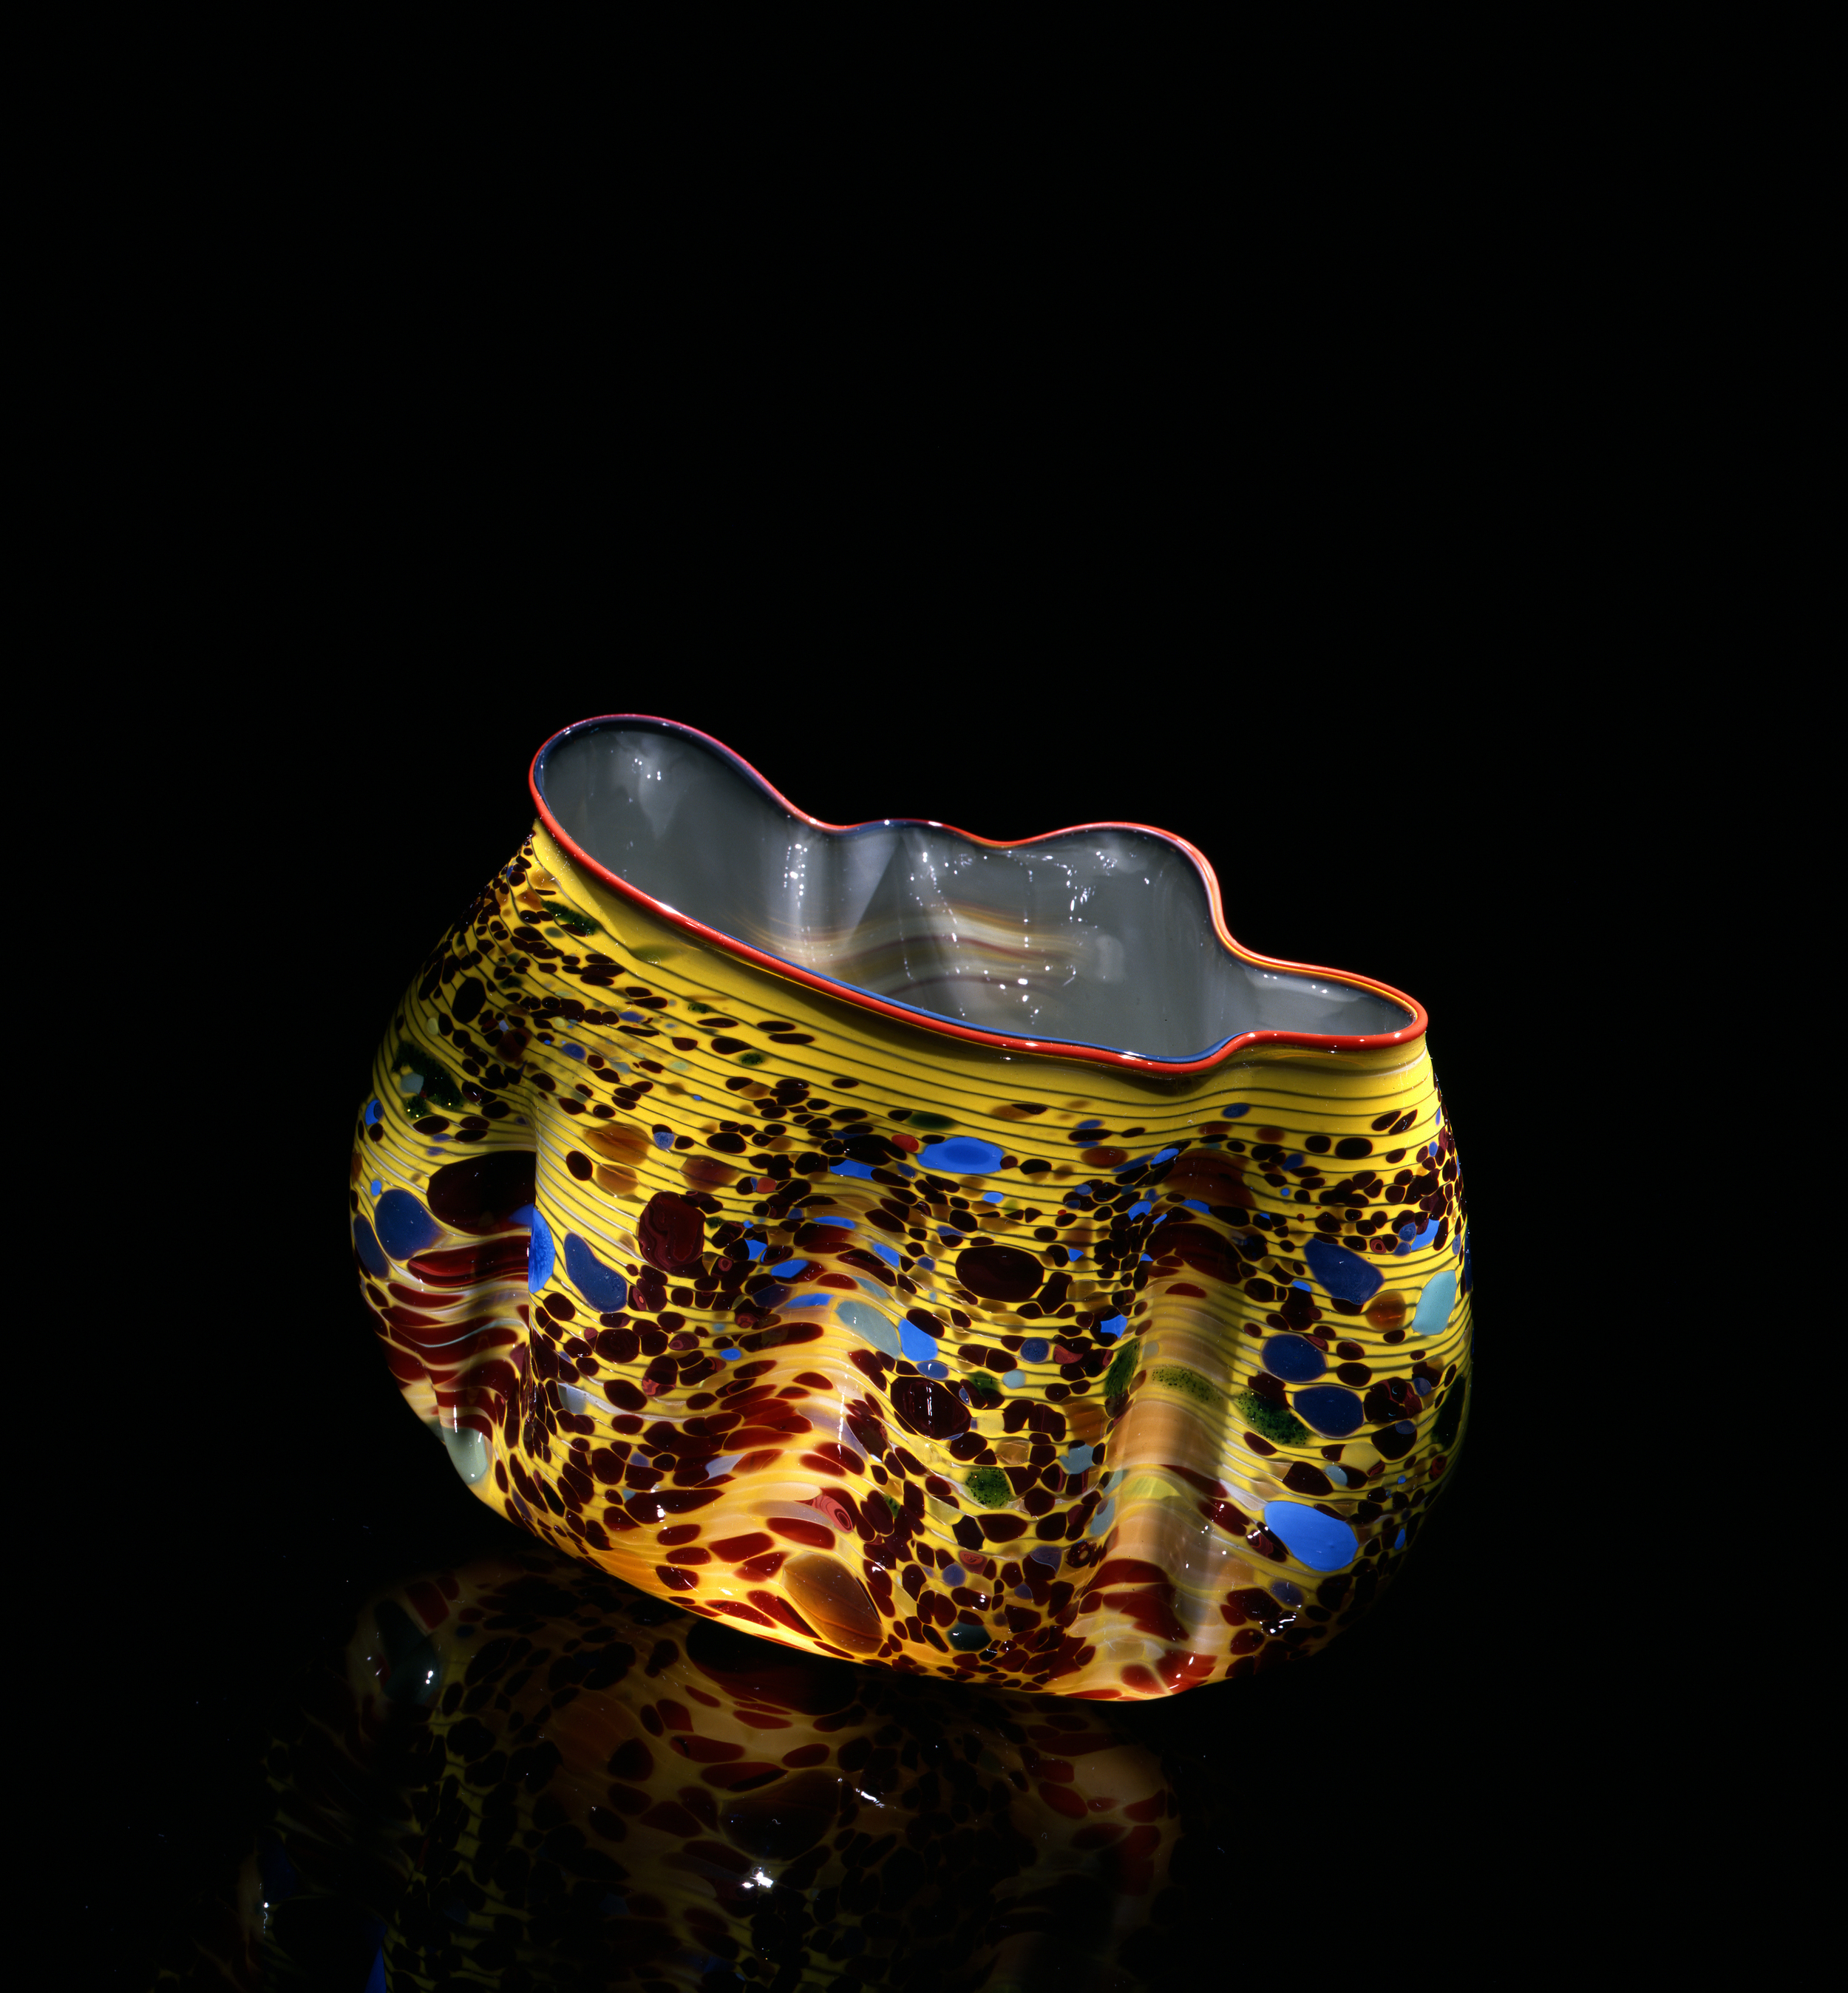  Dale Chihuly,&nbsp; Willow Macchia with Persimmon Lip Wrap&nbsp; (1982, glass, 7 x 9&nbsp;x 6 inches), DC.127 